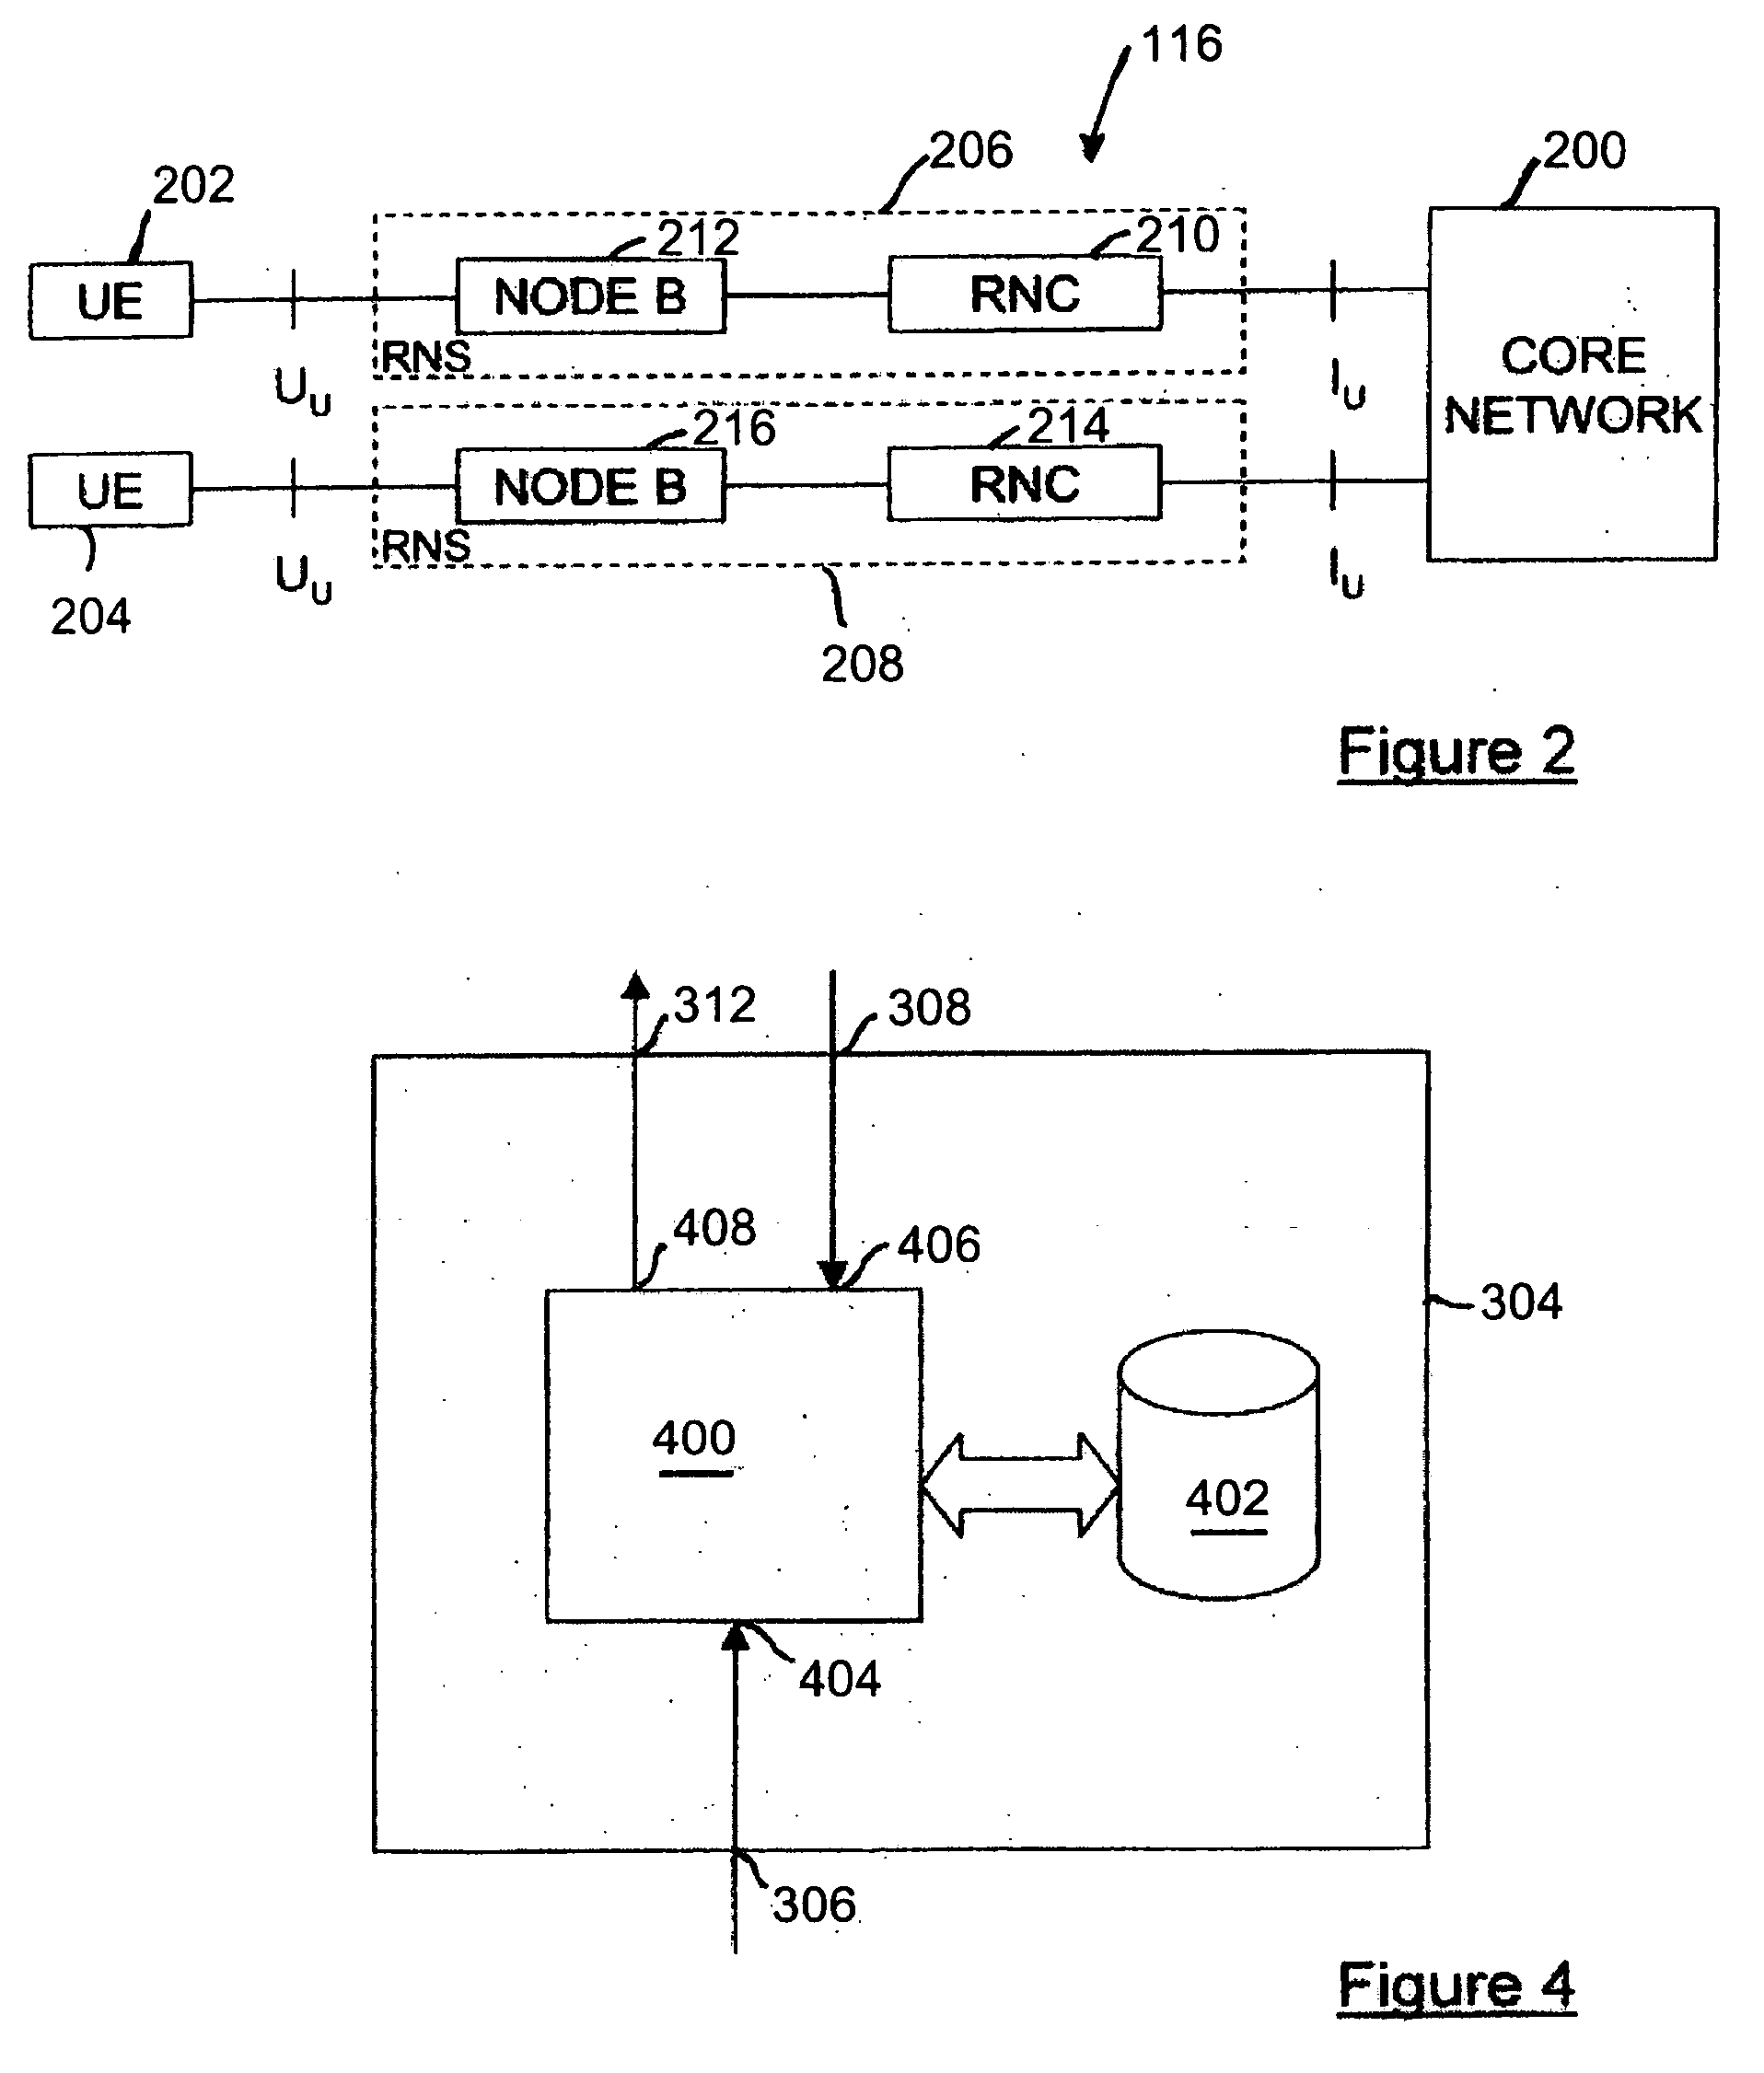 System, apparatus and method for detecting malicious traffic in a communications network